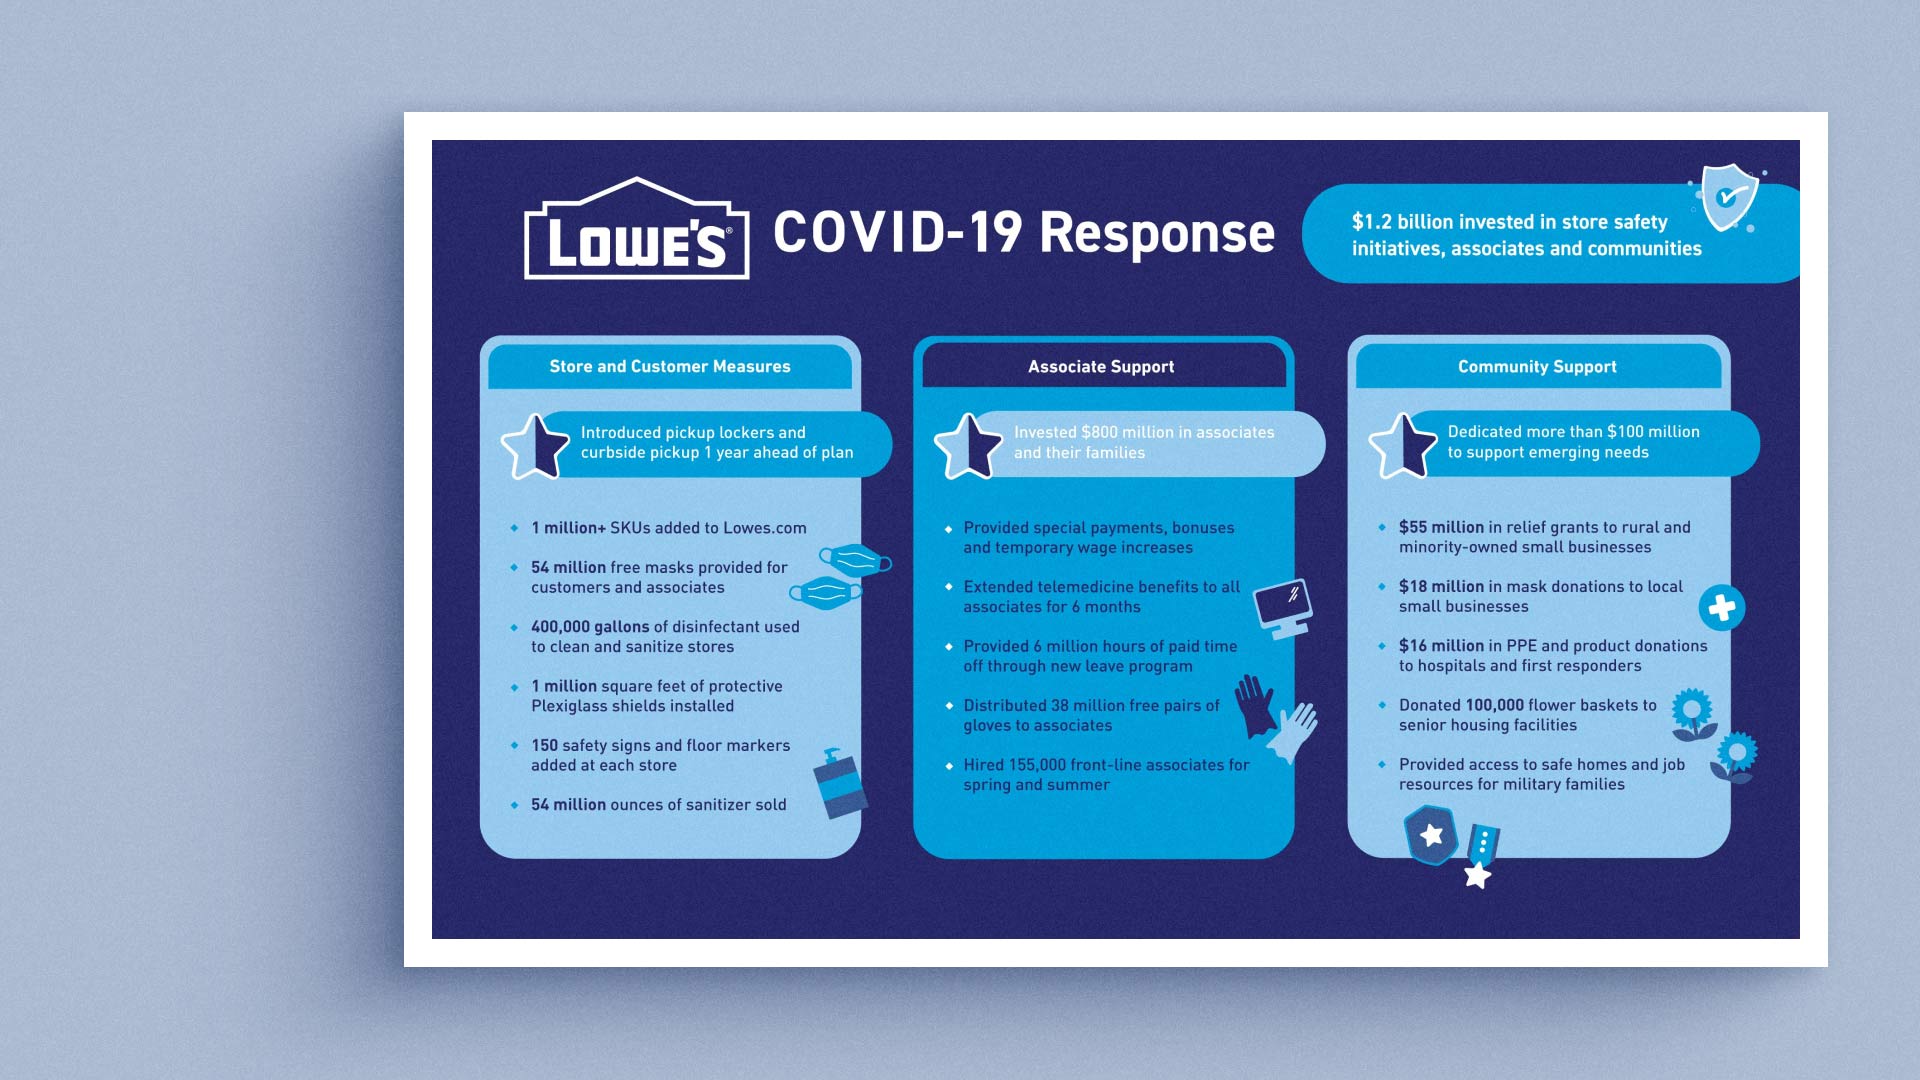 Informational piece showing Lowe's COVID-19 response for store and customer measures, associate support, and community support